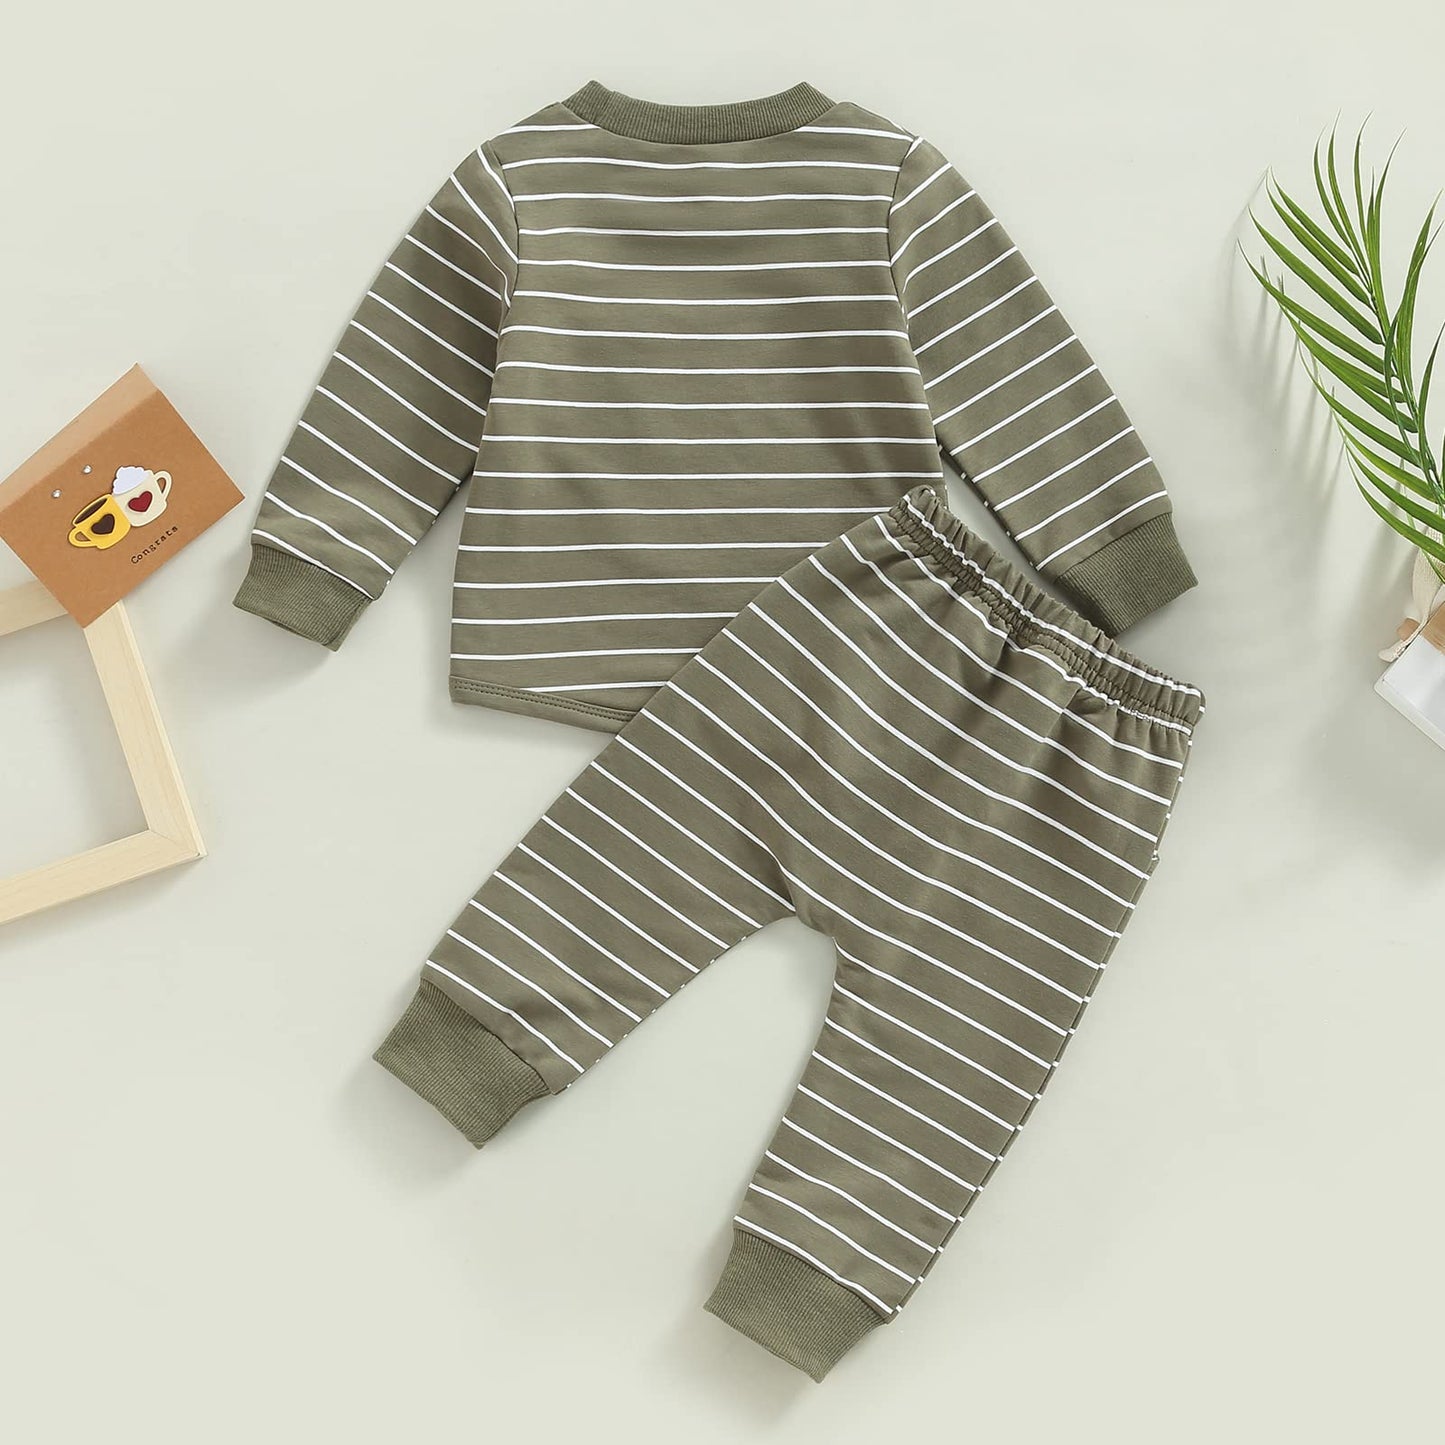 Toddler Baby Boy Clothes Fall Winter Outfit Patchwork Long Sleeve Sweatshirt Tops Stretch Pants Newborn Playwear Set 0-6 M